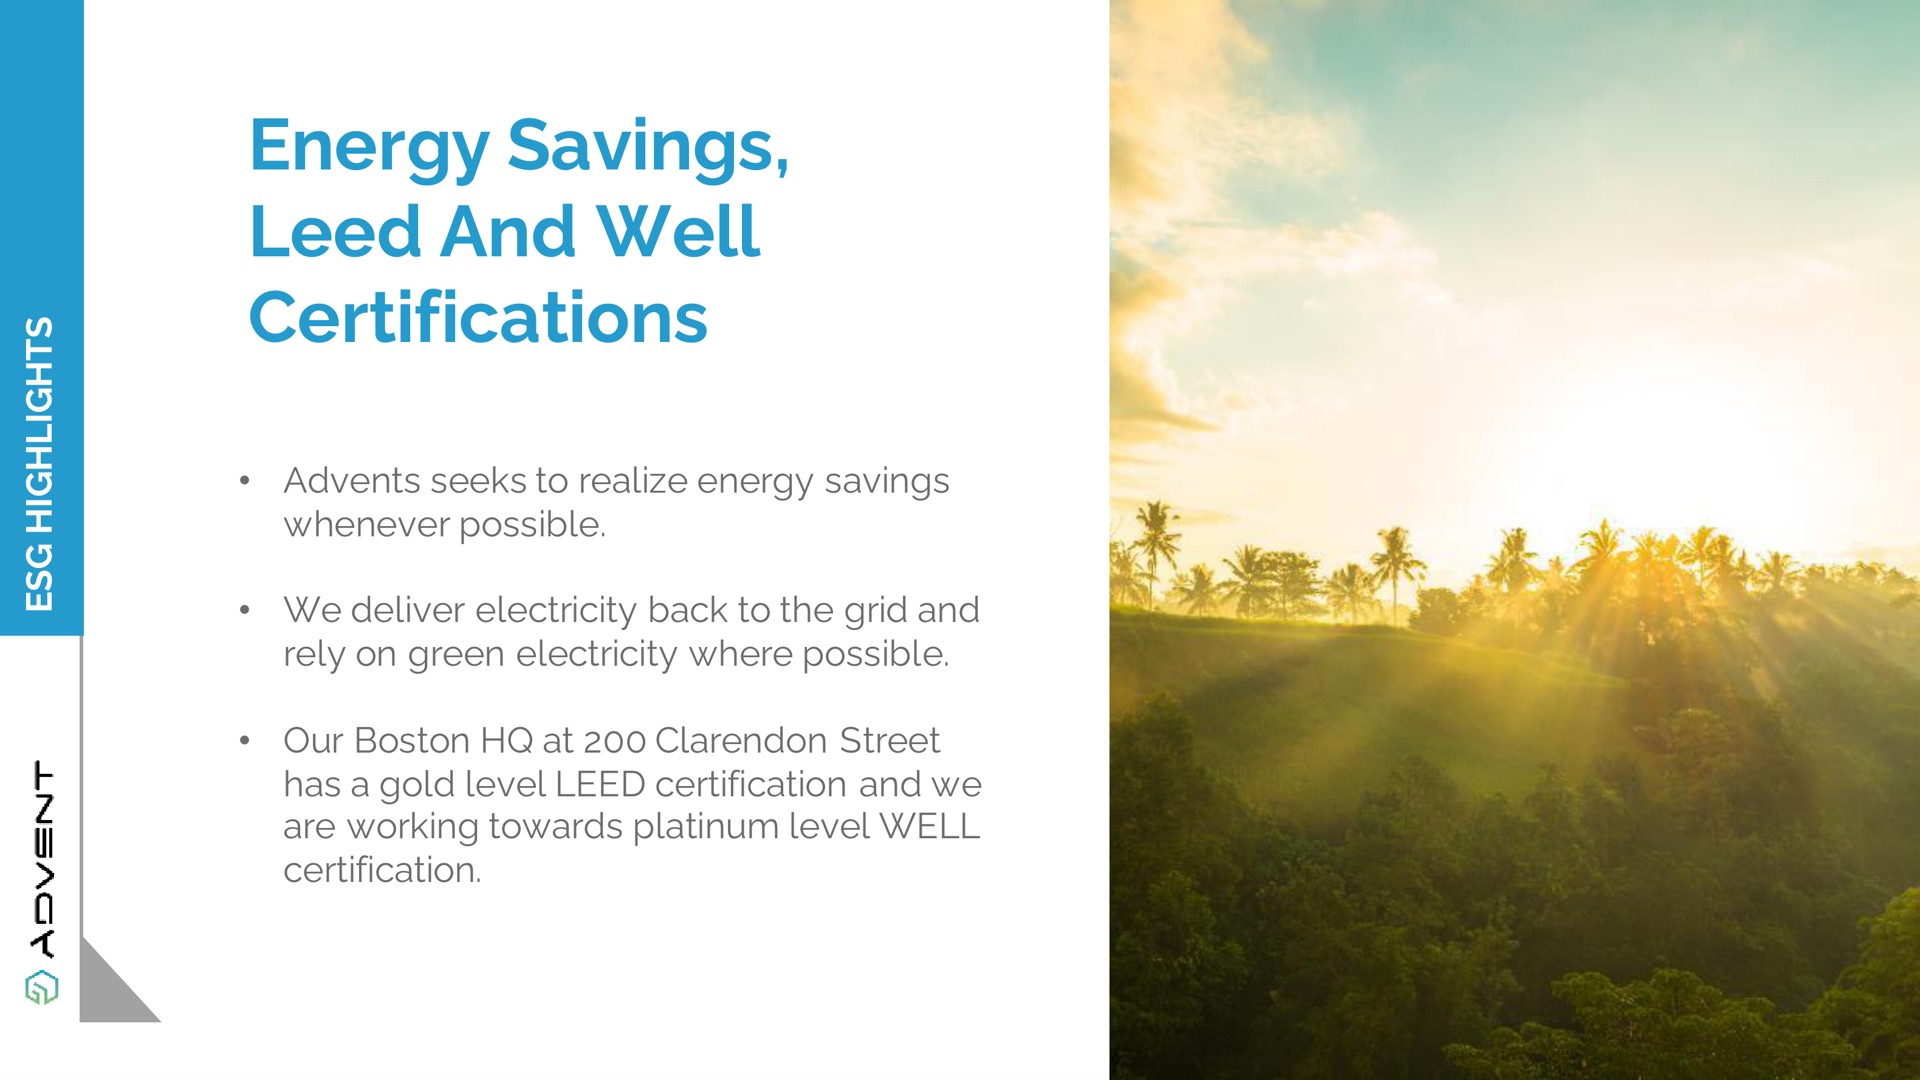 energy savings leed and well certifications | Advent